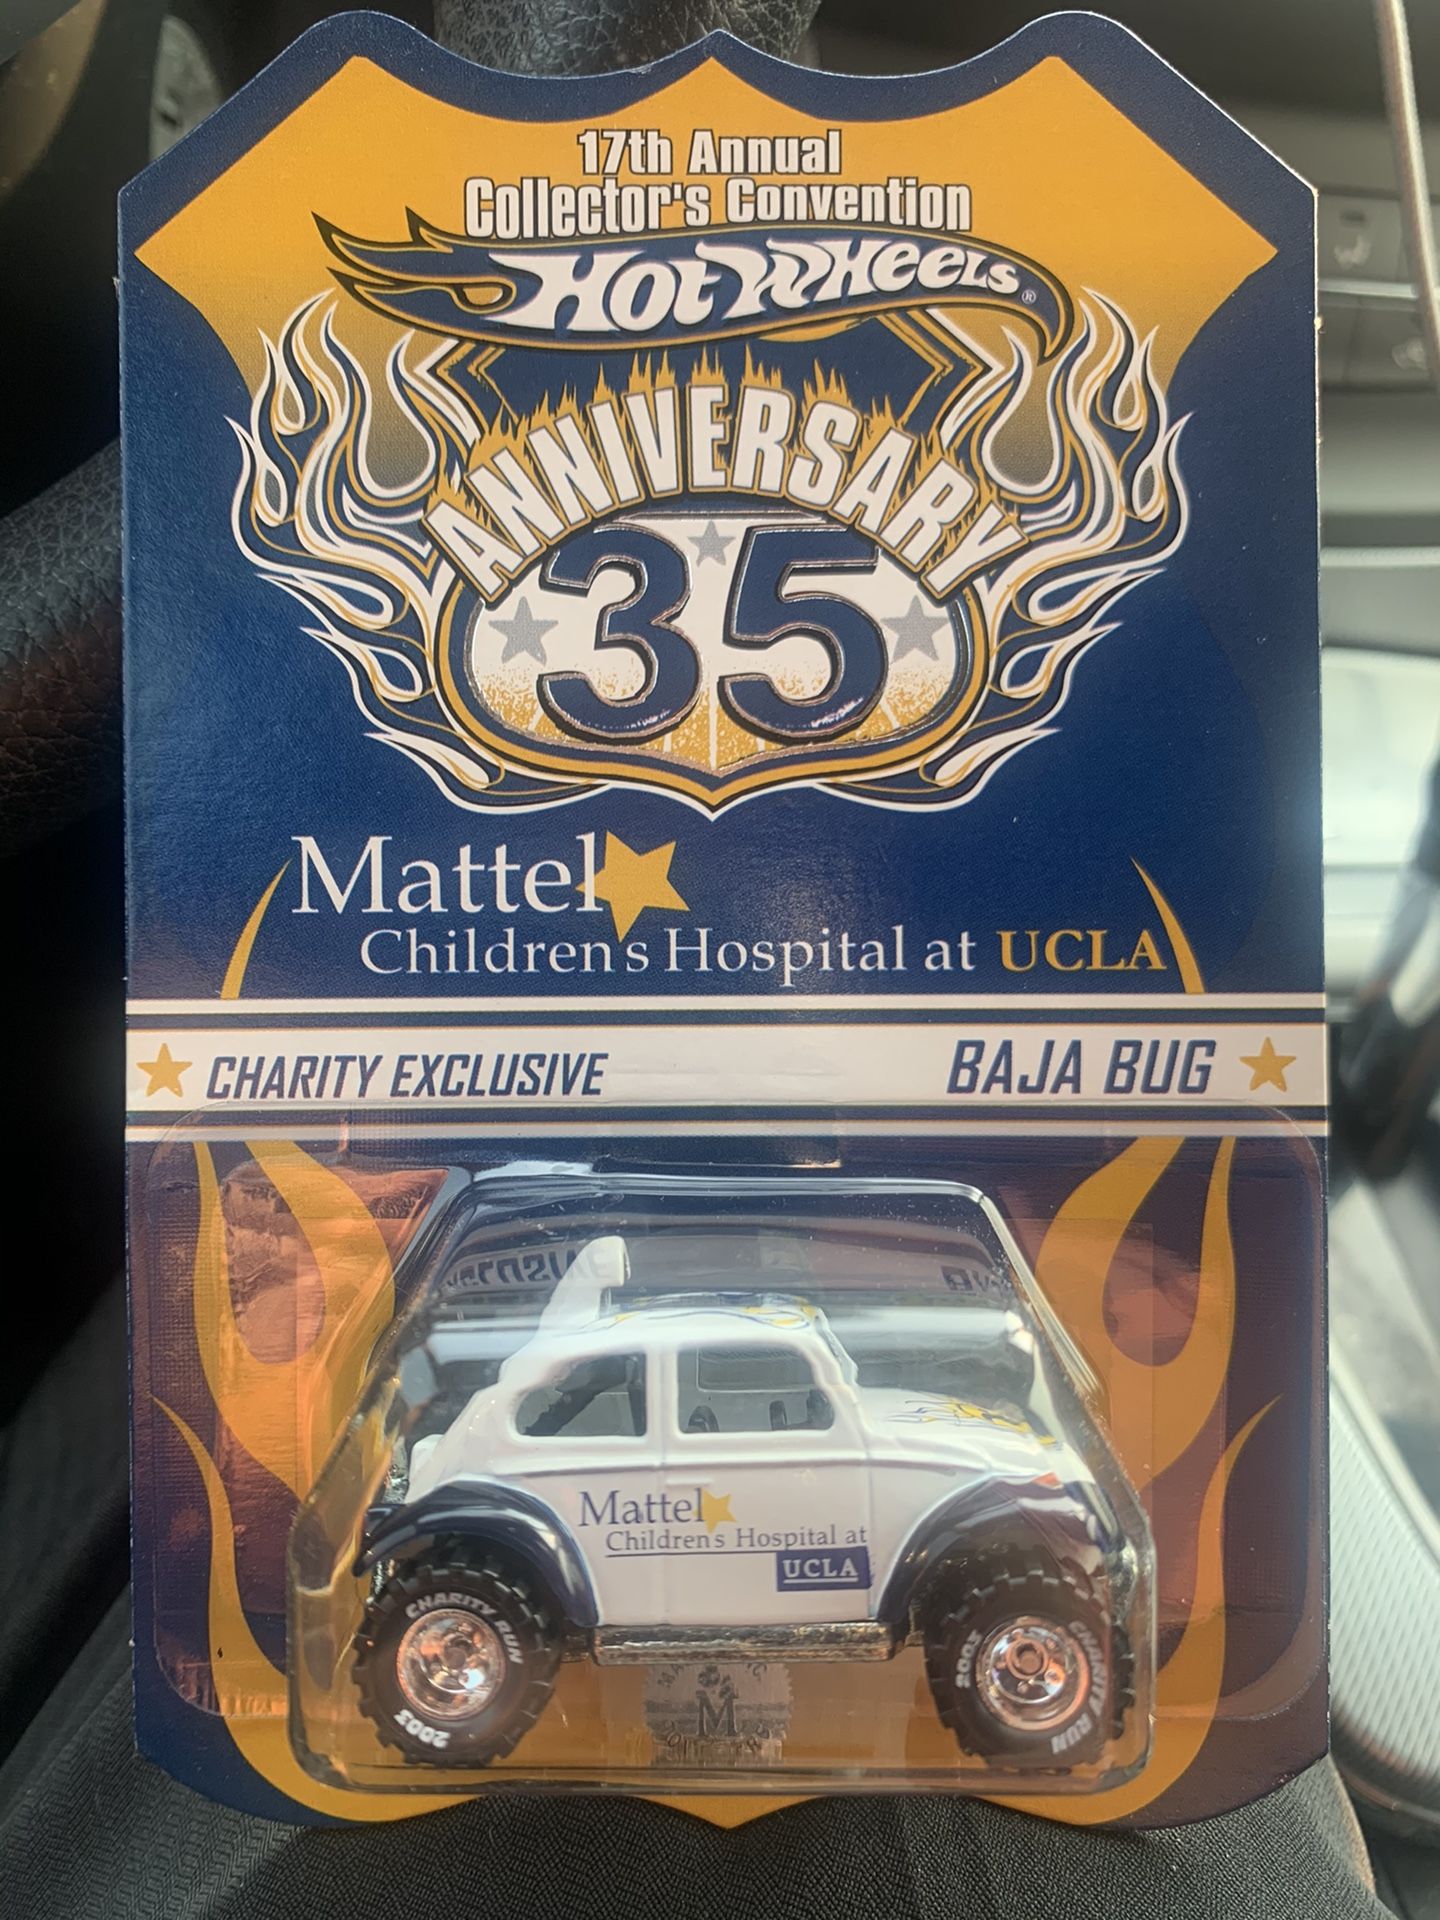 HOT WHEELS 35TH CONVENTION CHARITY EXCLUSIVE VW BAJA BUG RR #1329/4000 RARE LOW